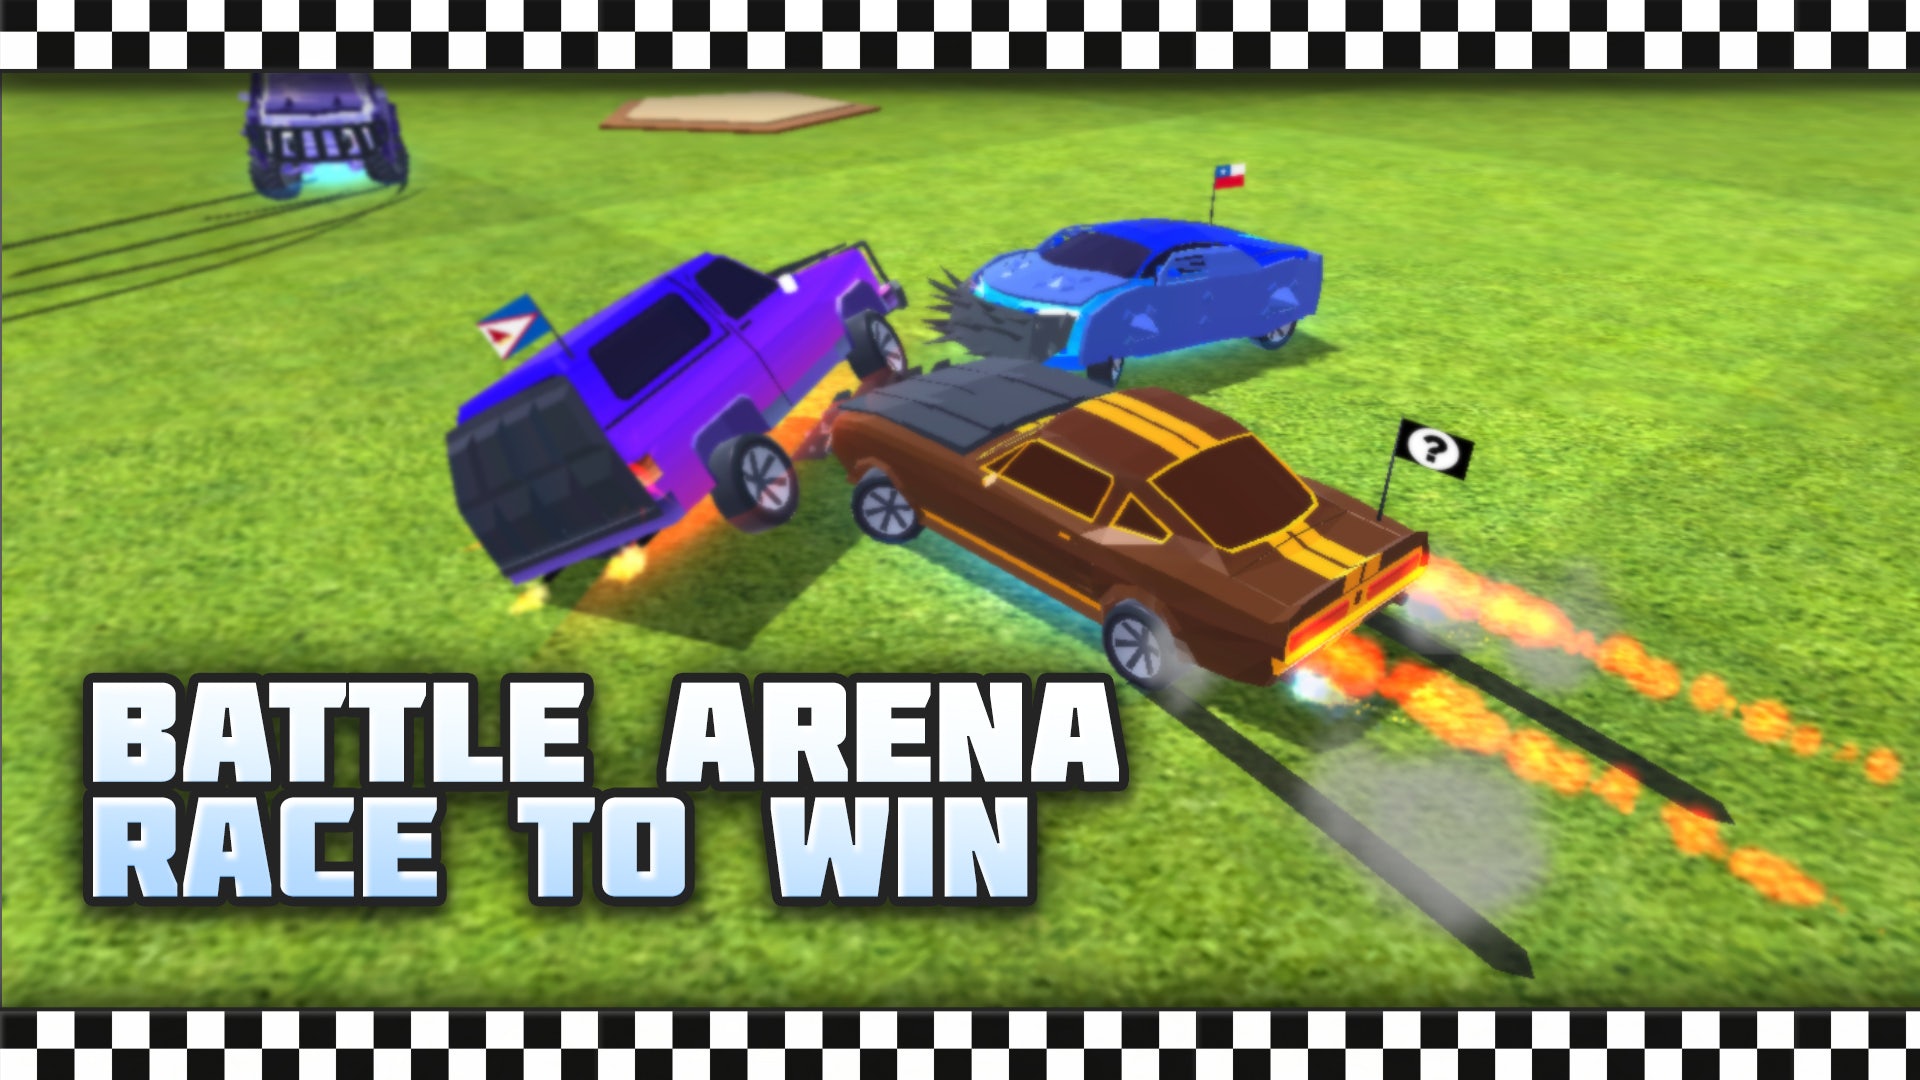 Battle Arena Race to Win